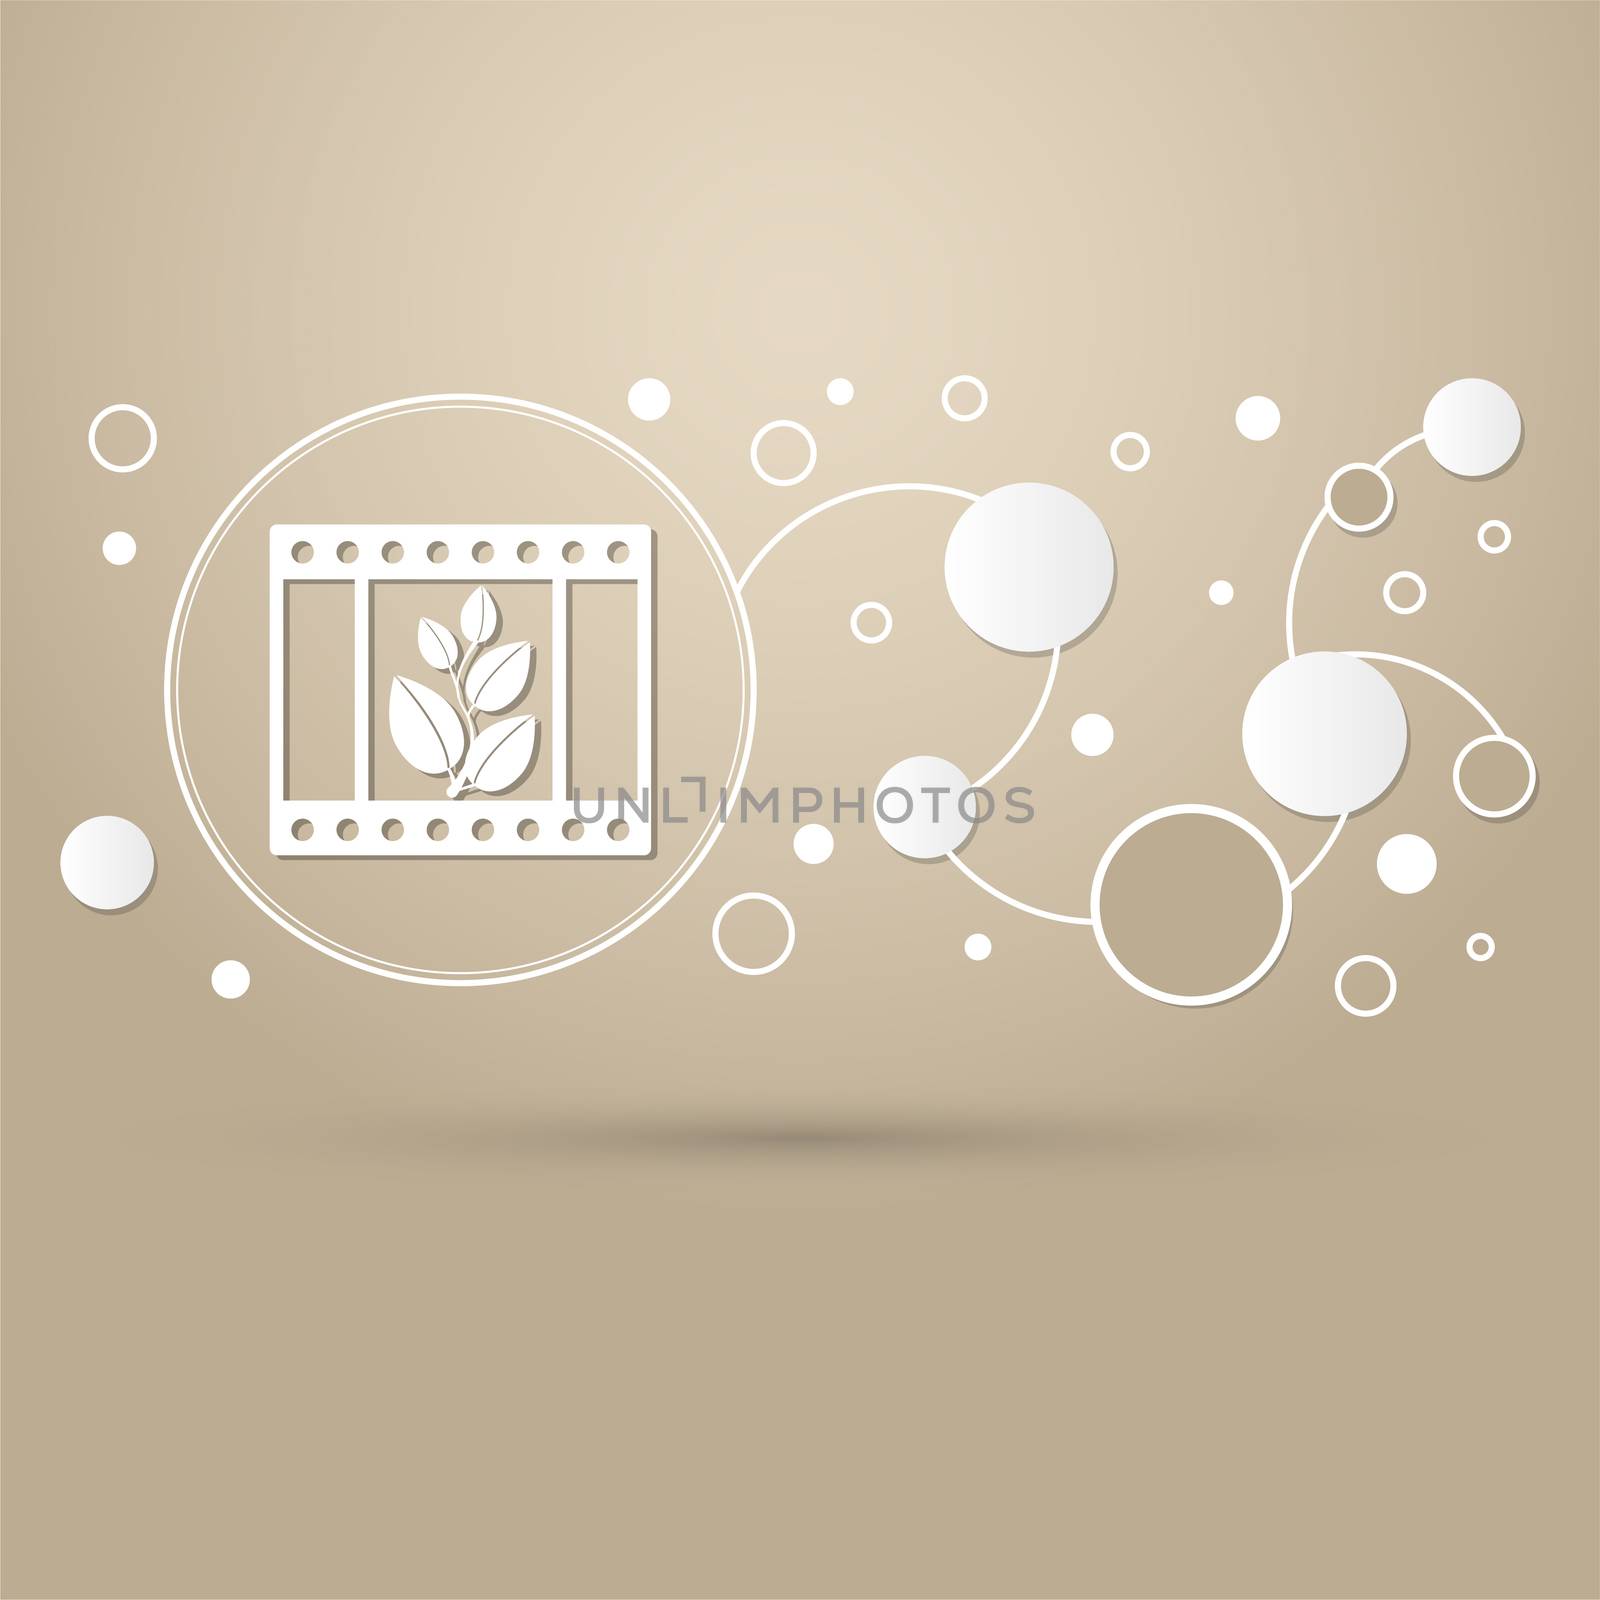 film Icon on a brown background with elegant style and modern design infographic. illustration